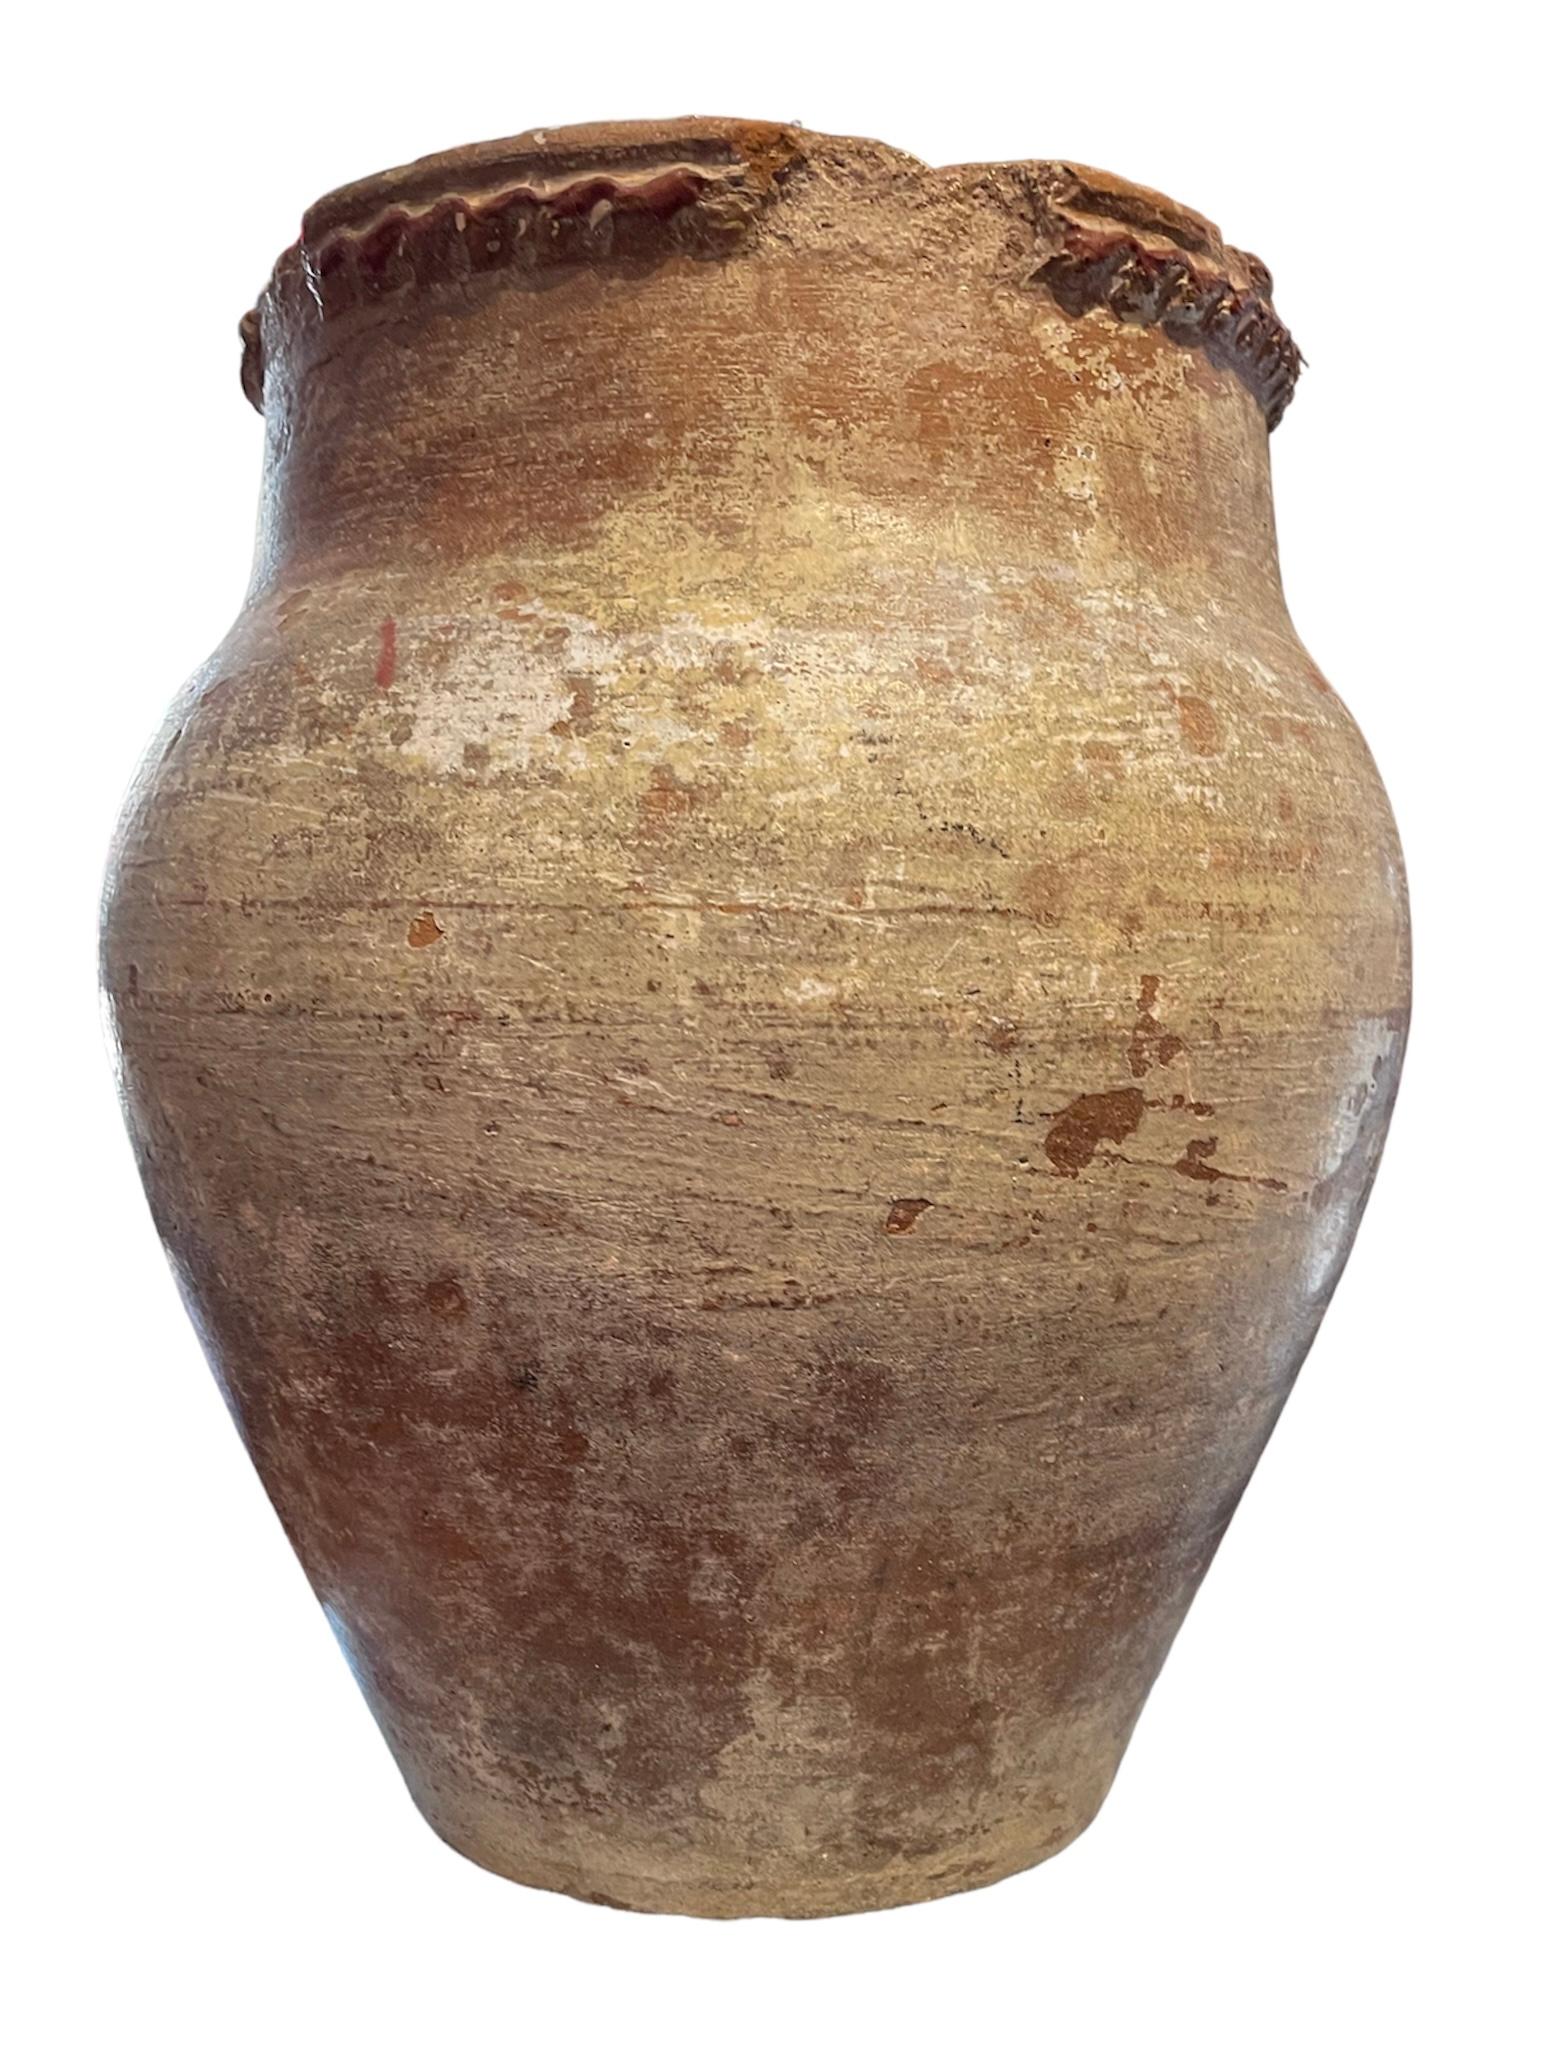 Spaniard Terracotta Amphora  In Good Condition For Sale In Guaynabo, PR